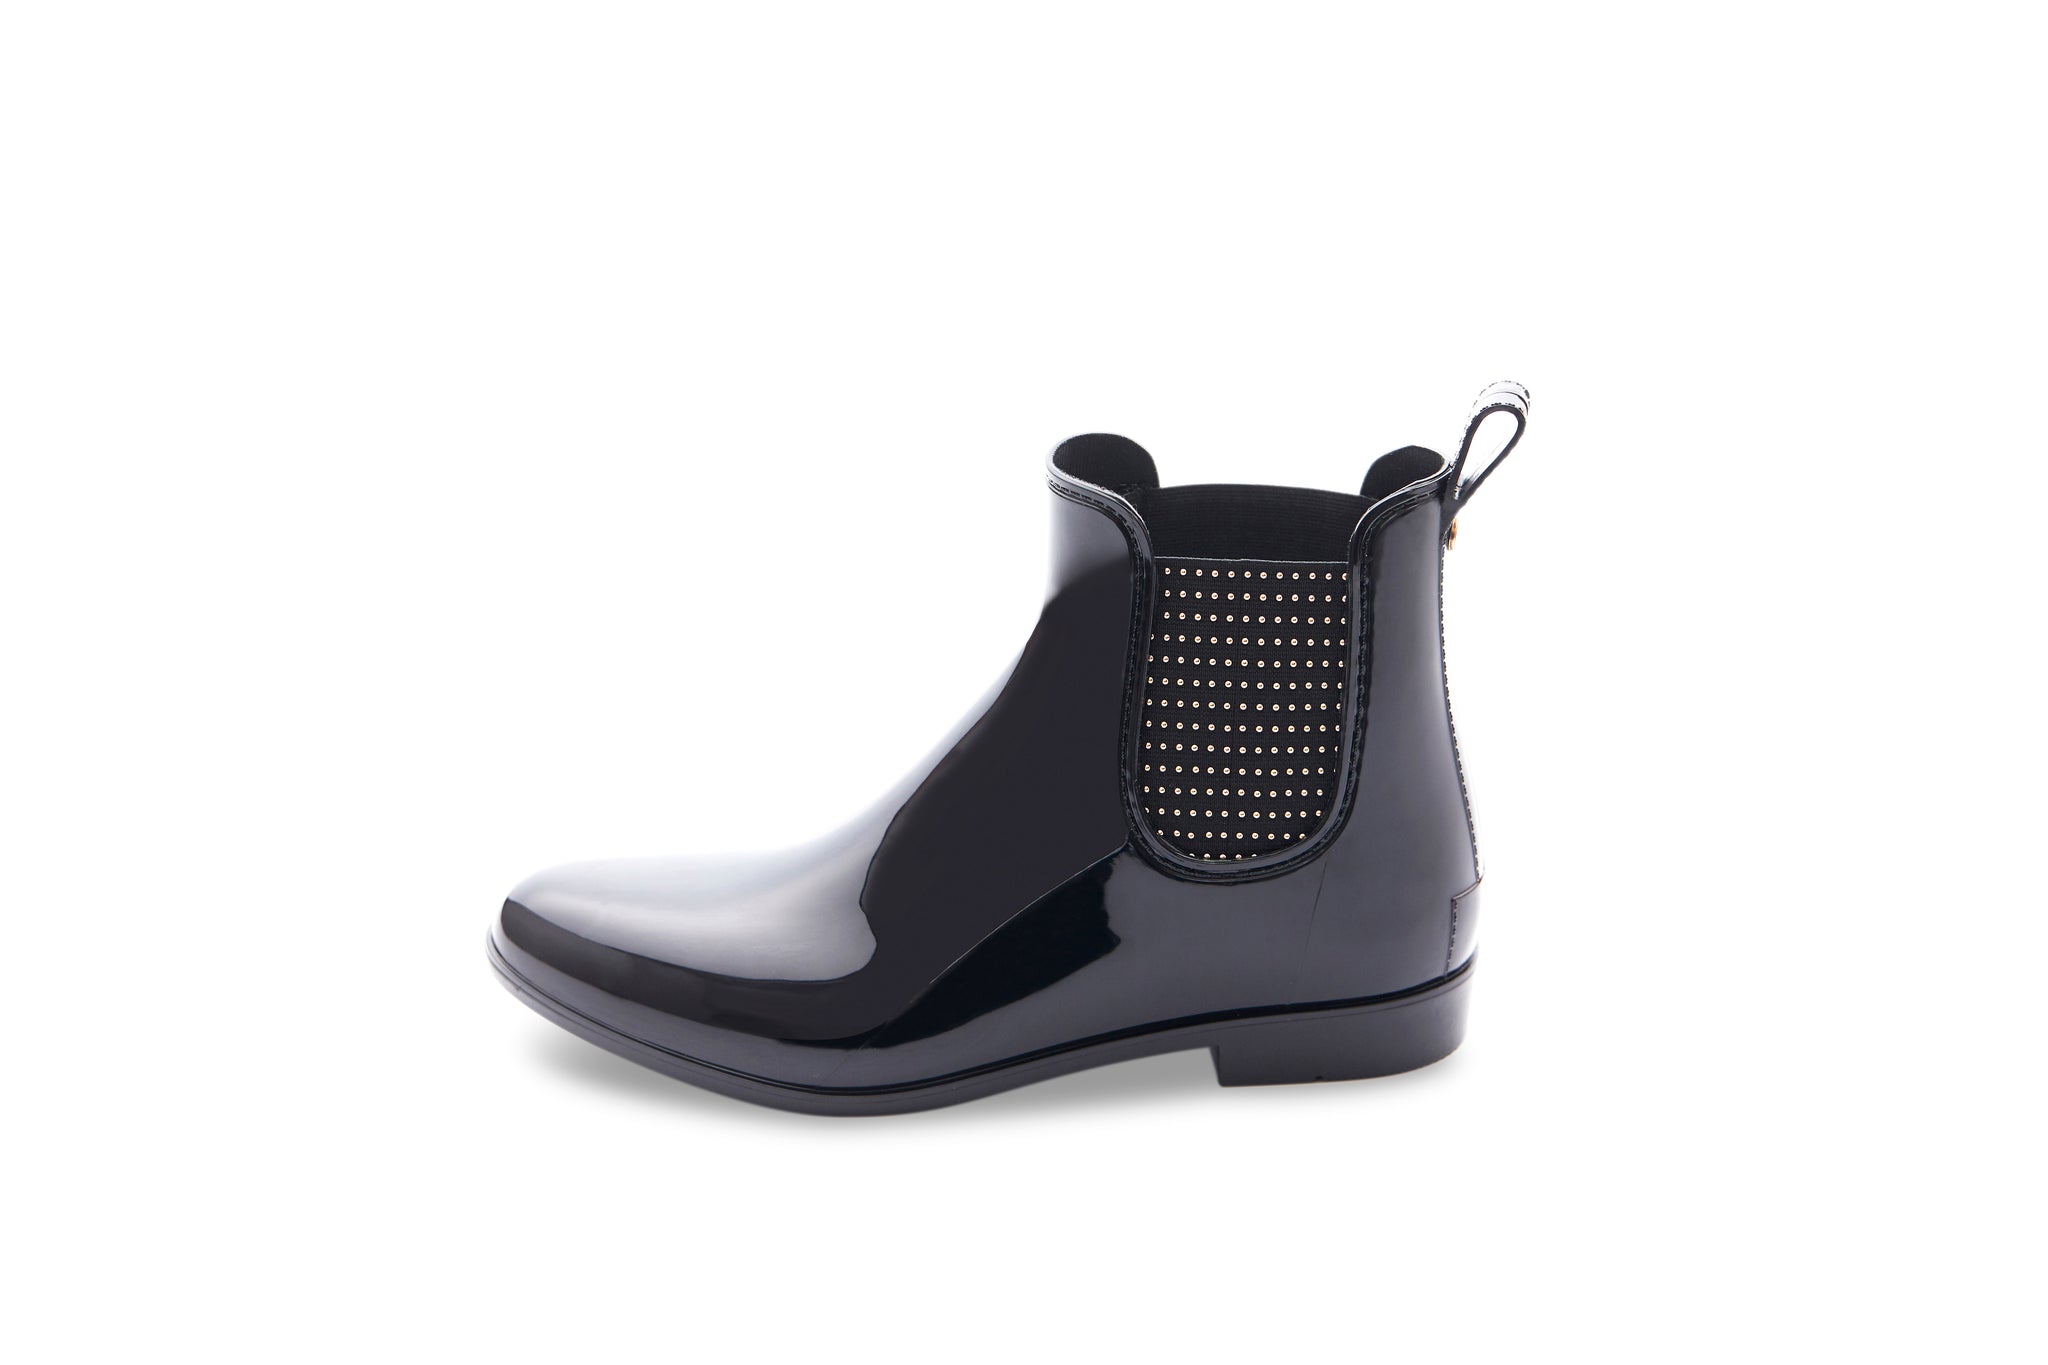 The Chelsea Ankle Rain Boot